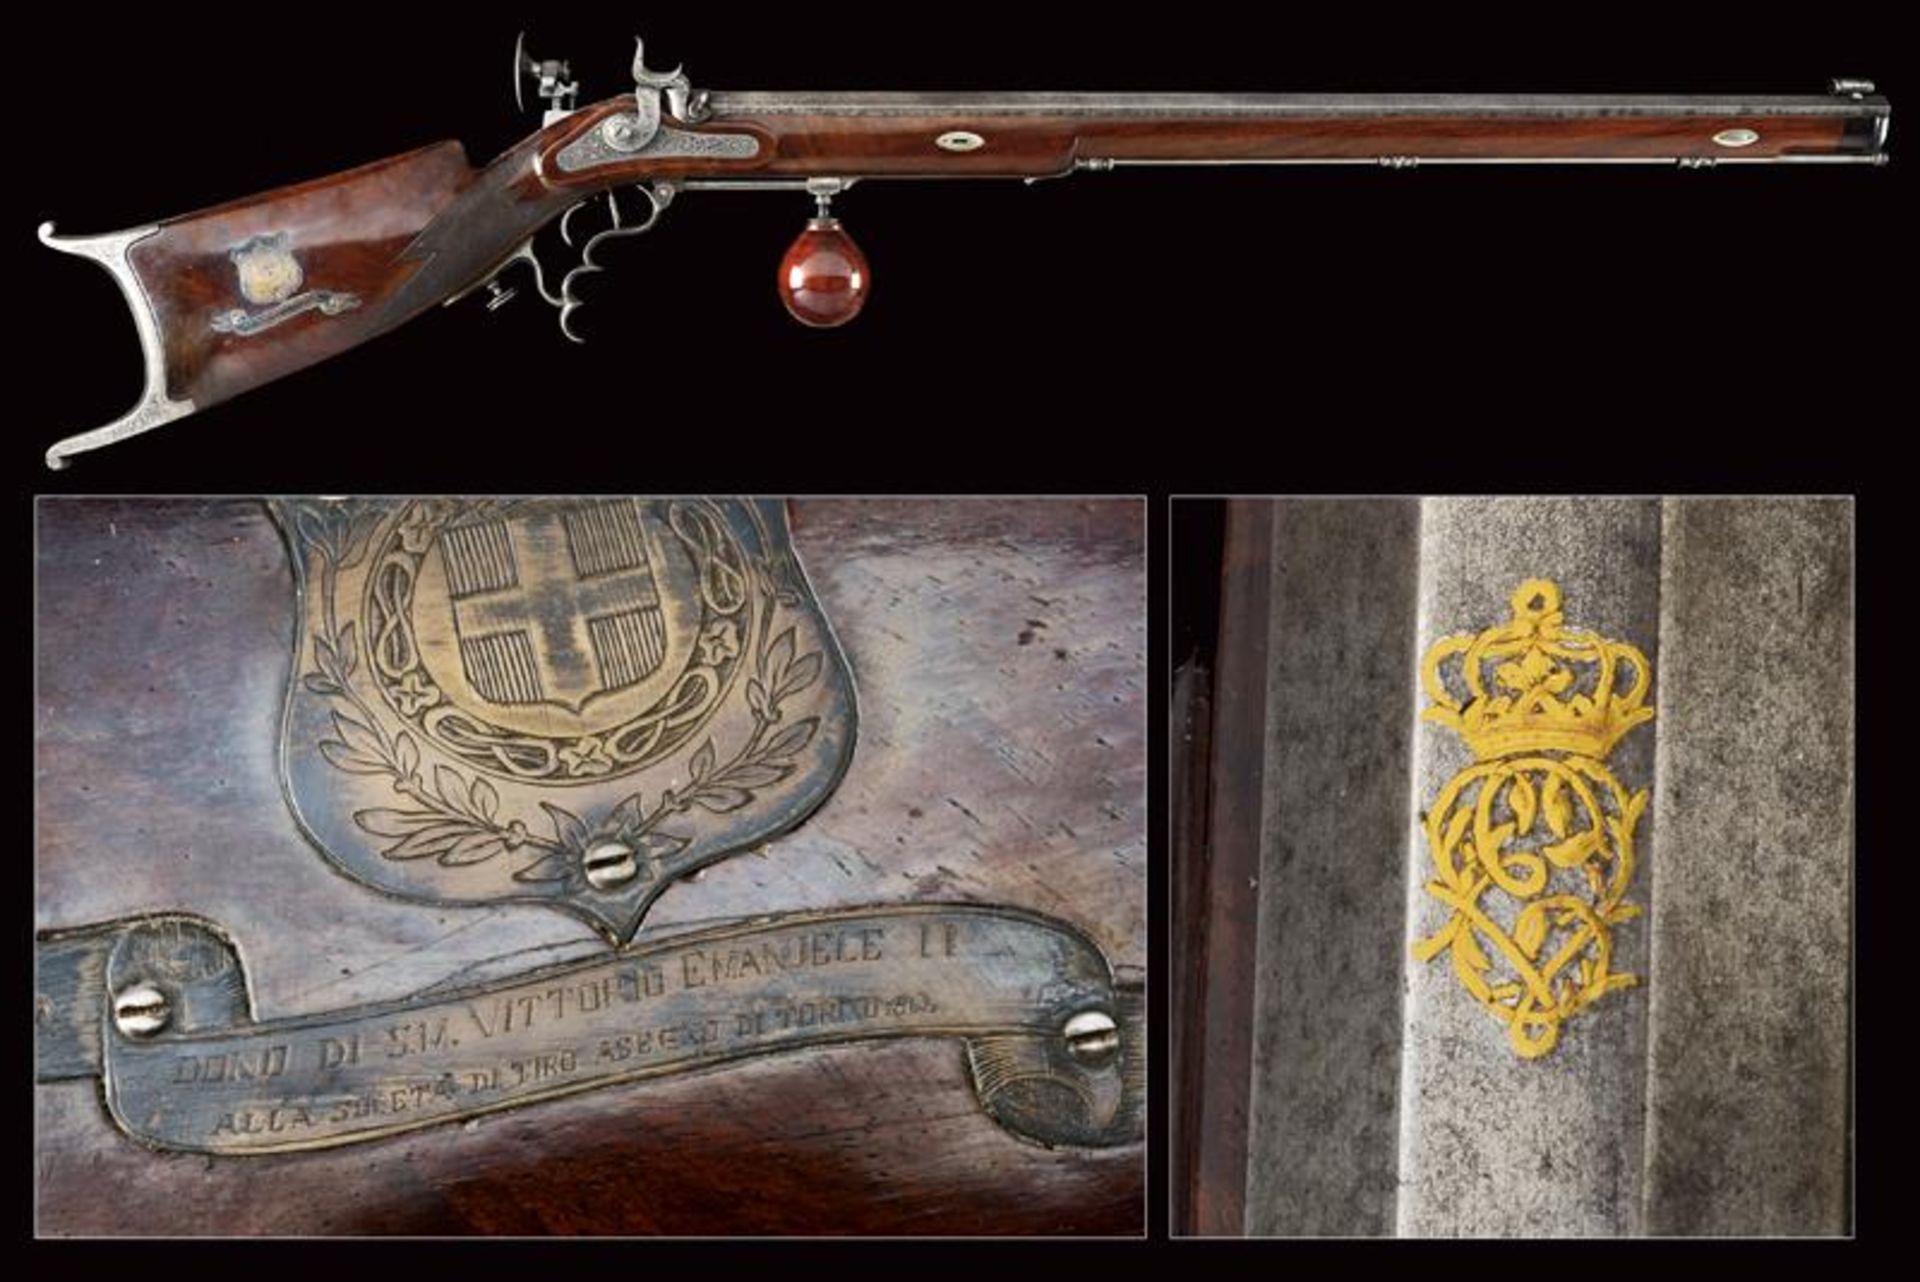 A beautiful presentation percussion target rifle, gifted by King Victor Emmanuel II